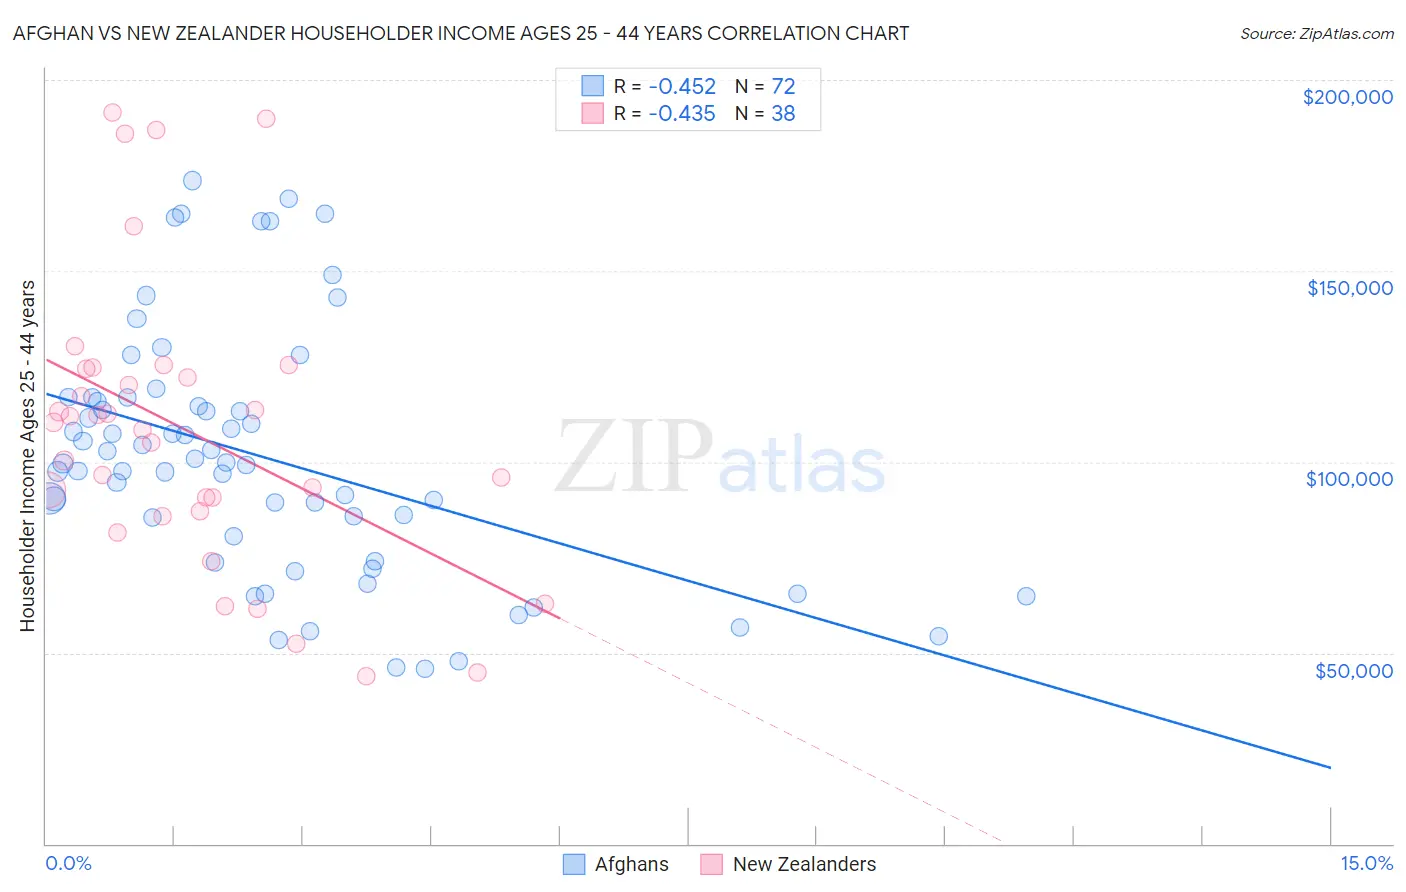 Afghan vs New Zealander Householder Income Ages 25 - 44 years